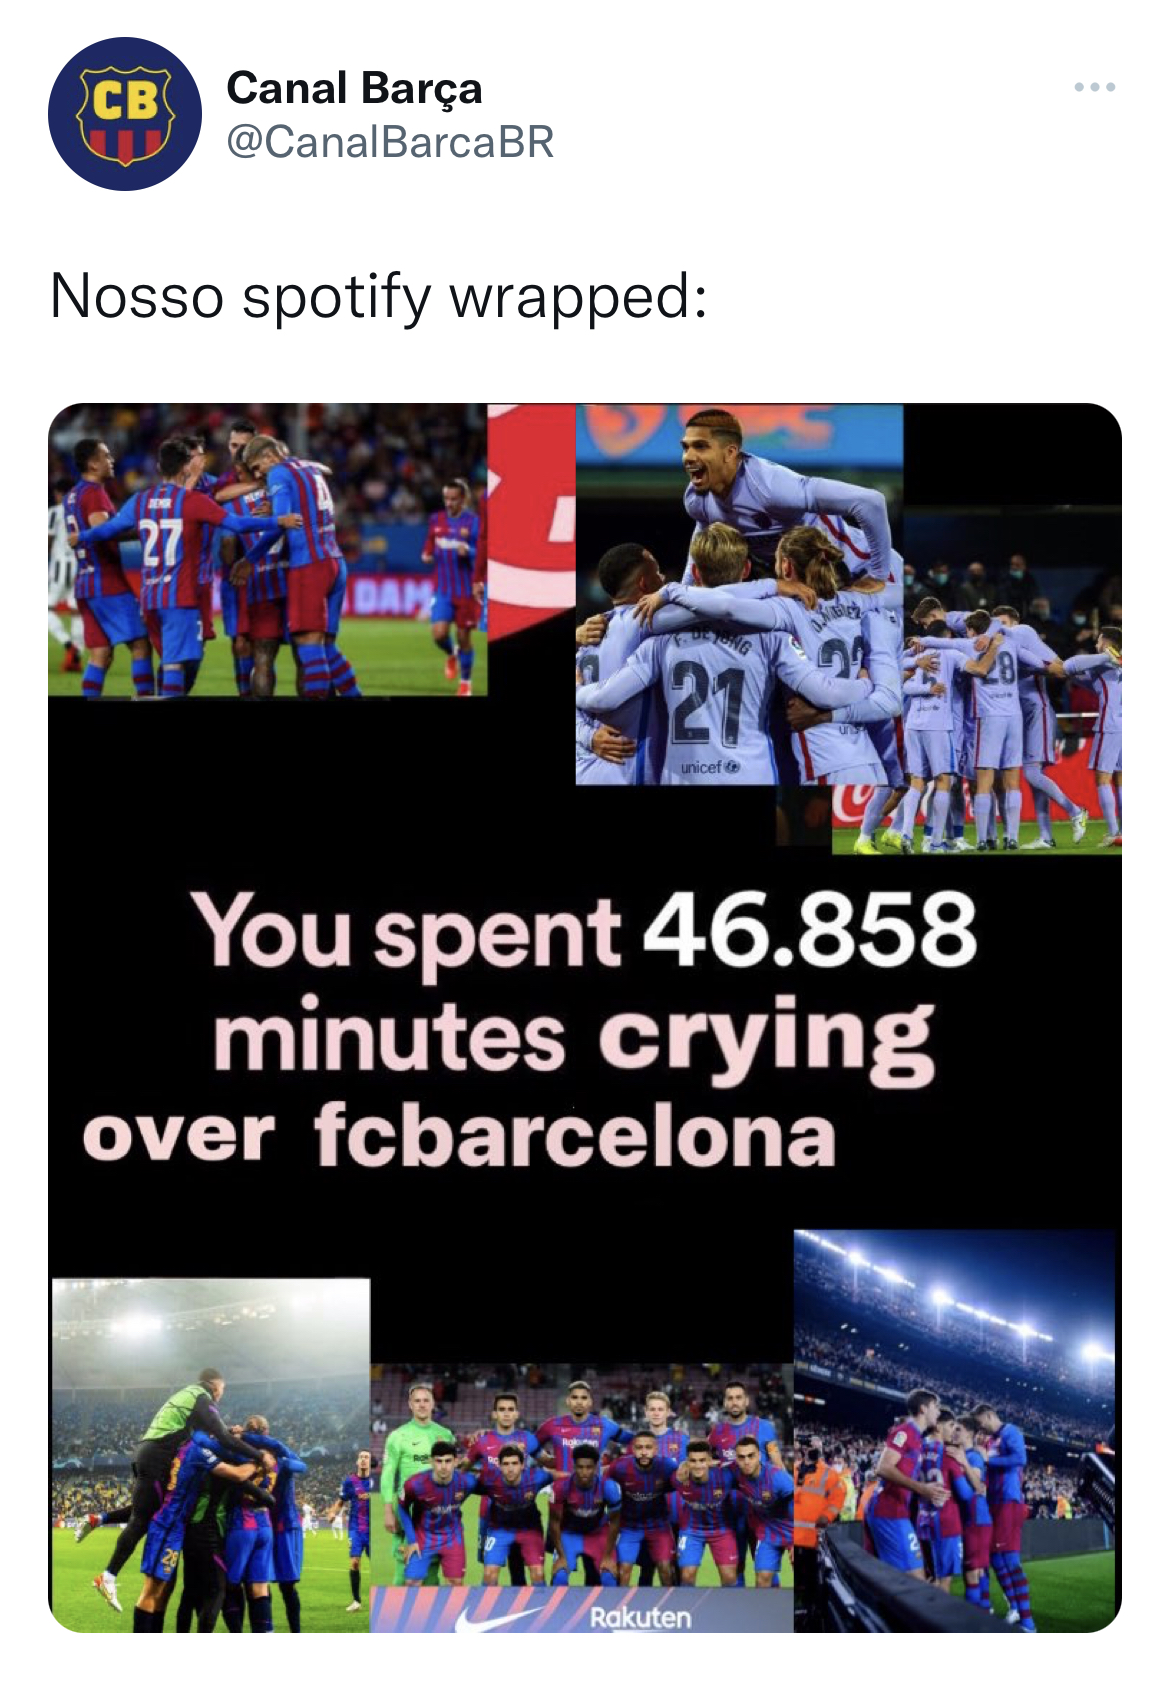 Spotify Wrapped Memes - yarra ranges council - Canal Bara Nosso spotify wrapped Cb 27 27 You spent 46.858 minutes crying over fcbarcelona Rakuten